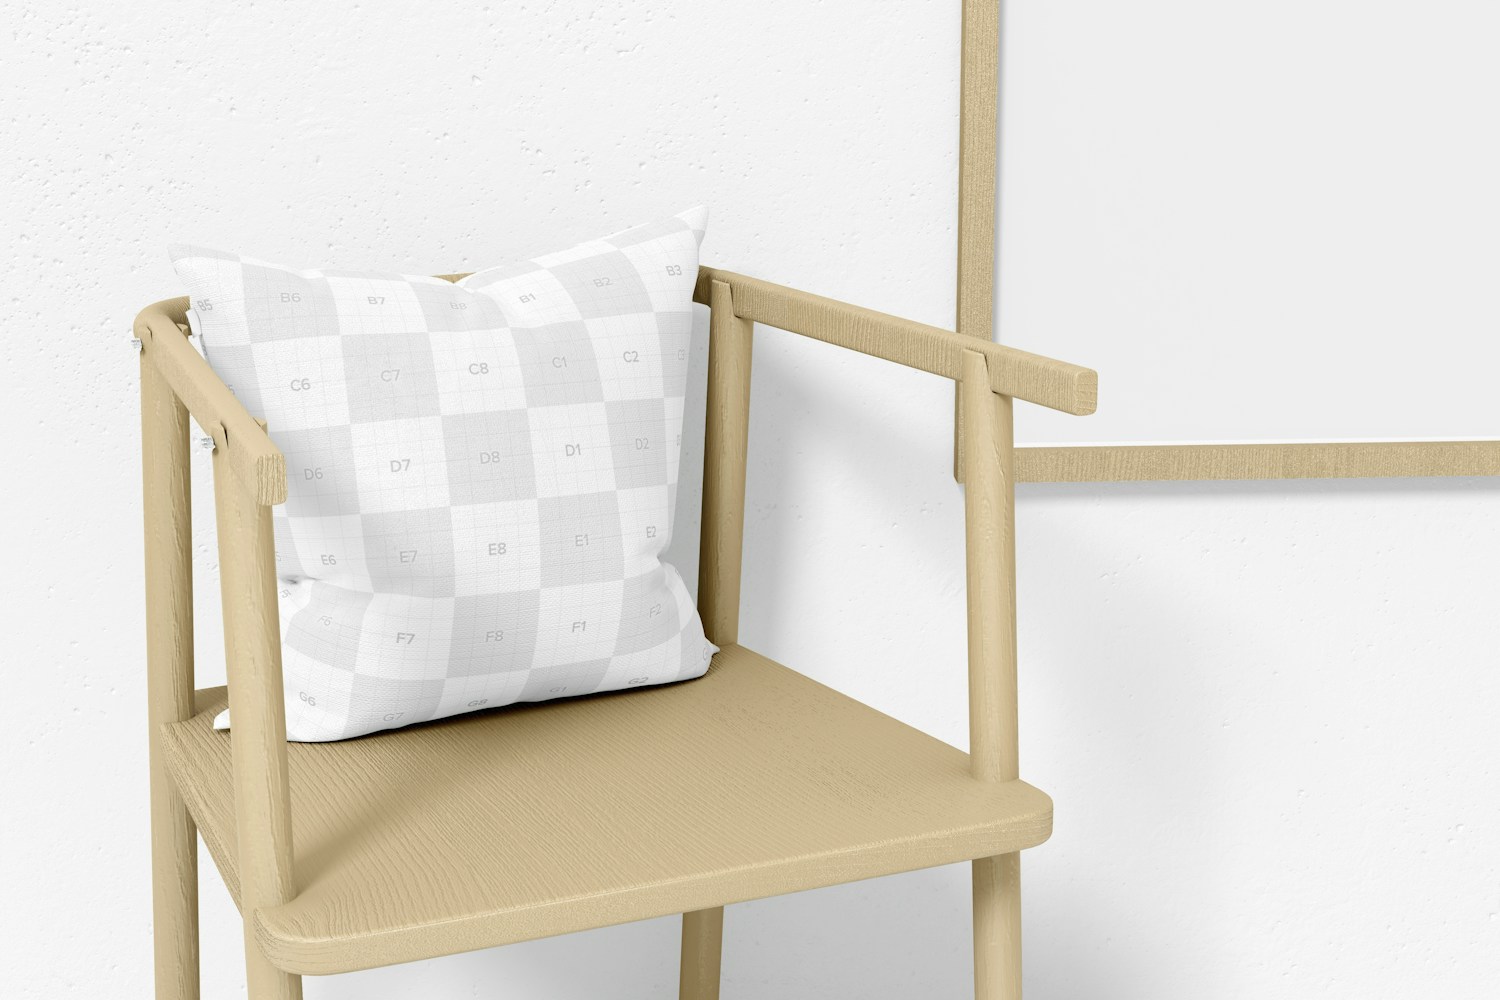 Square Pillow and Chair Mockup